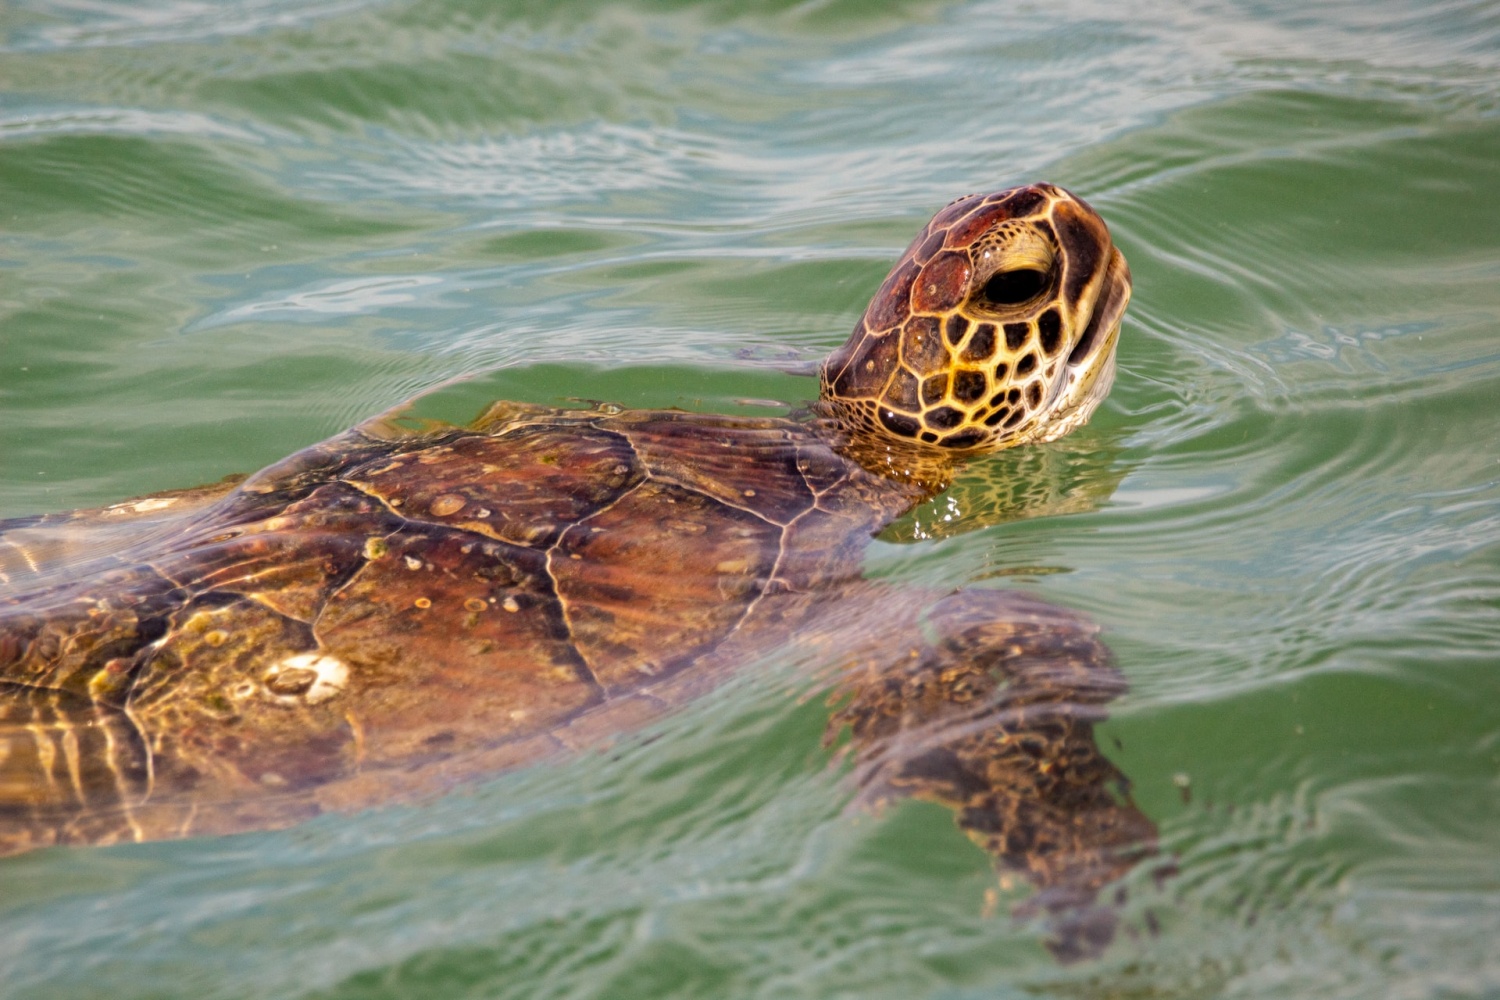 Cold Stunned Sea Turtles Caught In Hypothermic Water Temperatures Taken To Rehab Centers